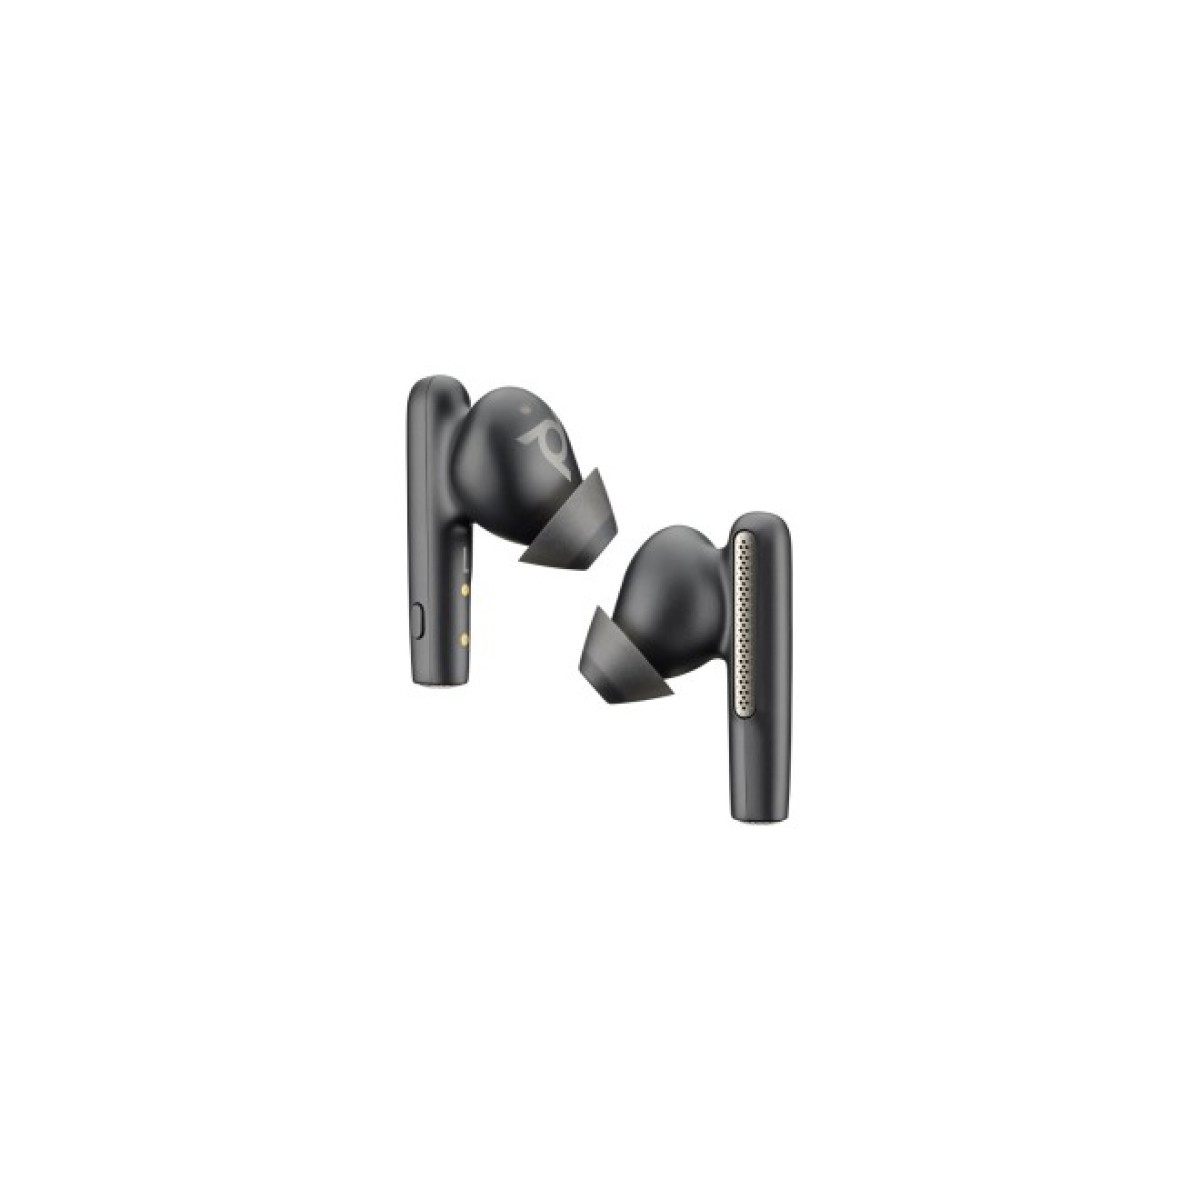 Навушники Poly Voyager Free 60 Earbuds + BT700C + BCHC Black (7Y8H4AA) 256_256.jpg